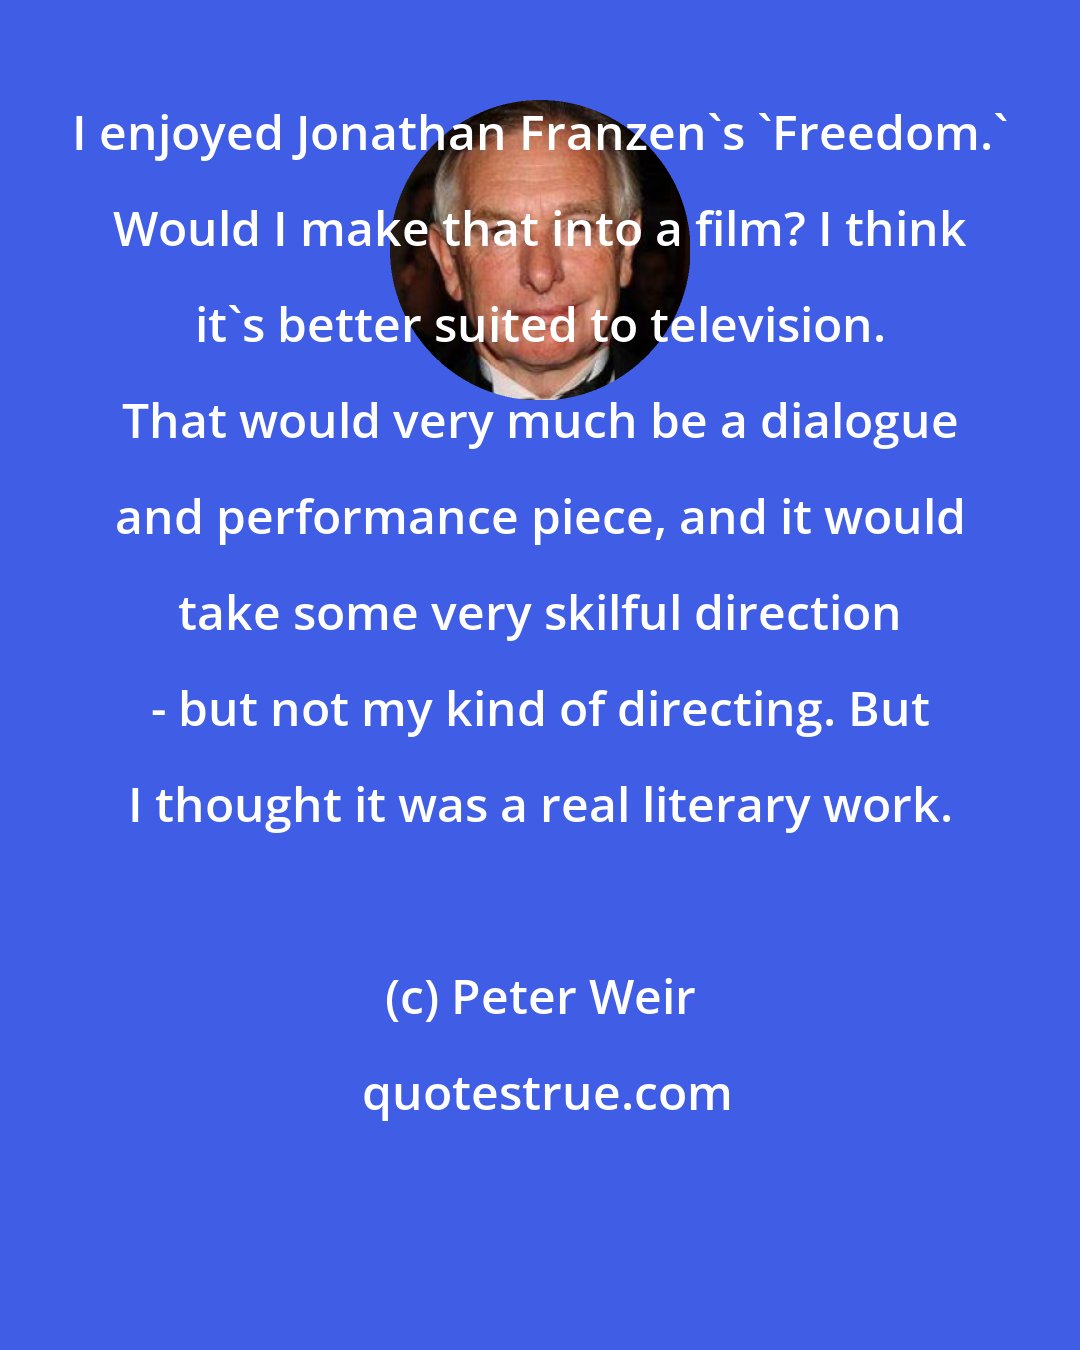 Peter Weir: I enjoyed Jonathan Franzen's 'Freedom.' Would I make that into a film? I think it's better suited to television. That would very much be a dialogue and performance piece, and it would take some very skilful direction - but not my kind of directing. But I thought it was a real literary work.